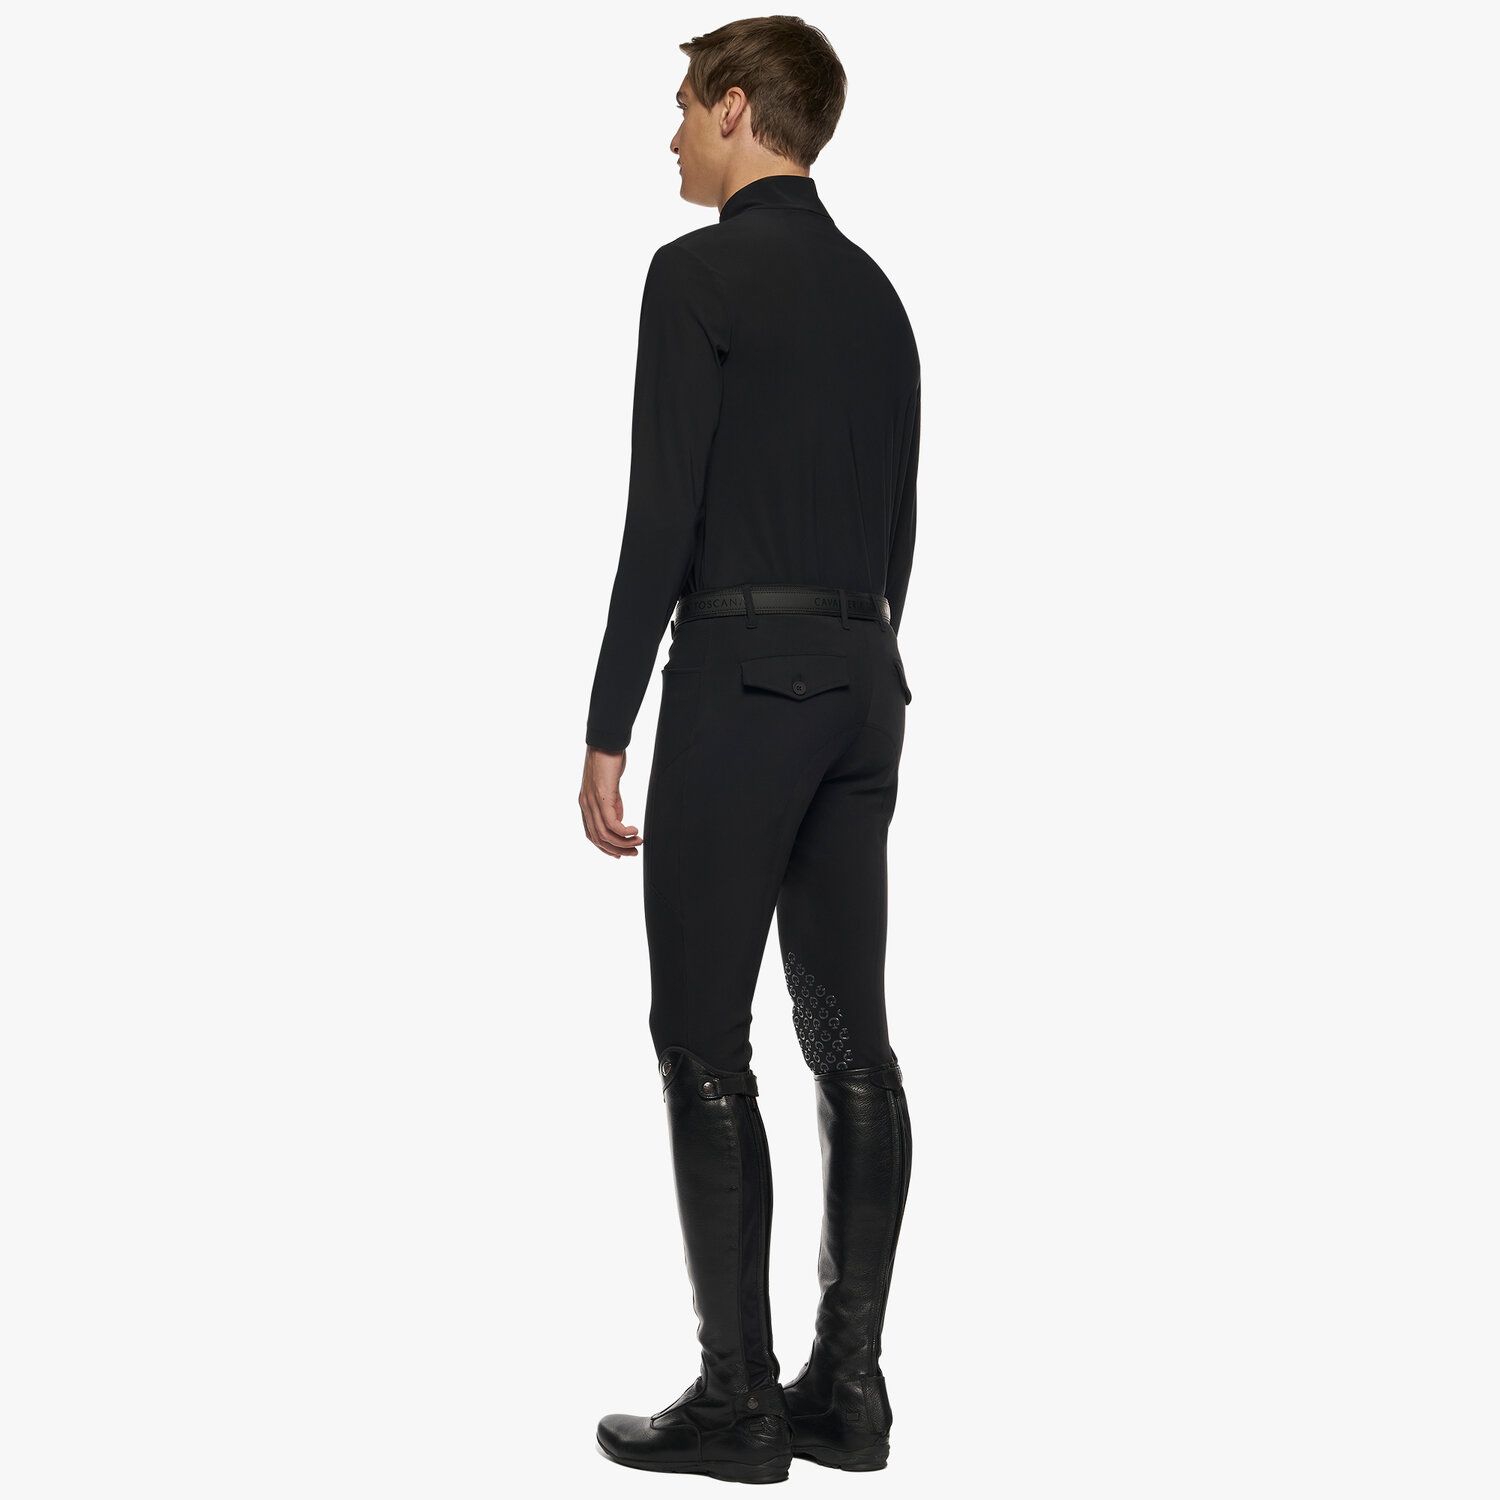 Cavalleria Toscana Men’s performance jersey base layer with a zip BLACK-3